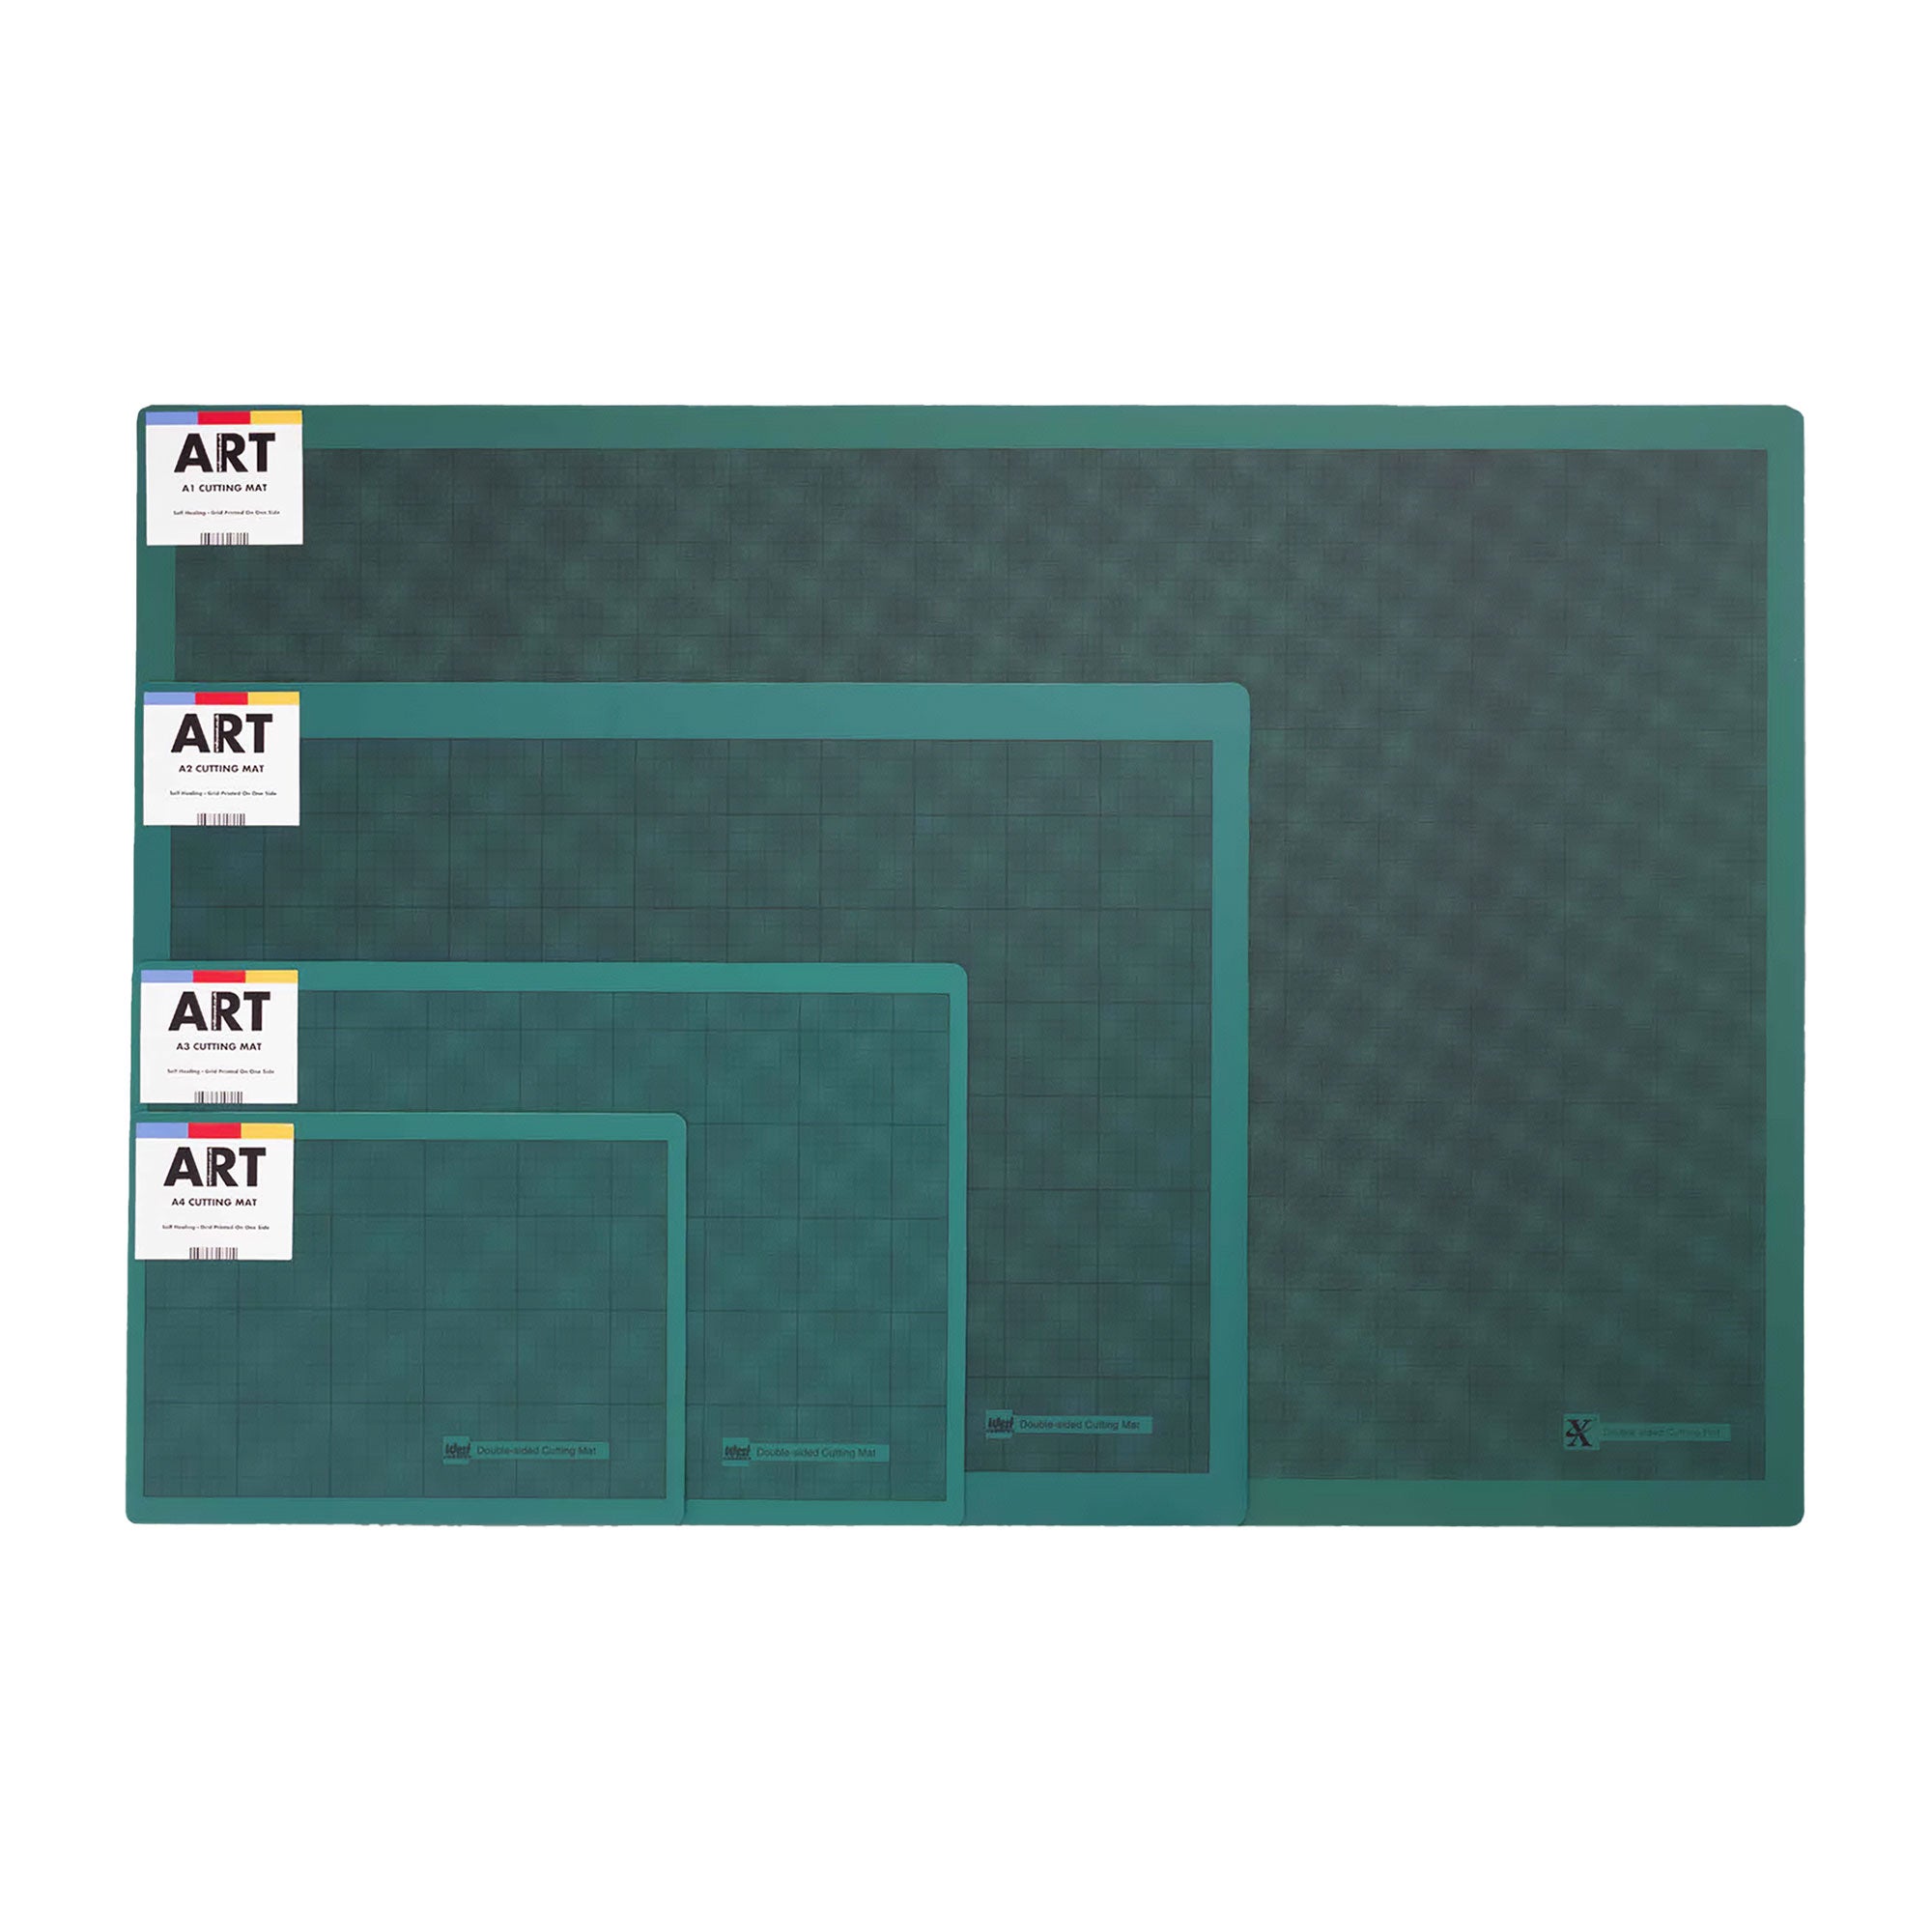 ARTdiscount Cutting Mats in various sizes, ranging from A4 to A1